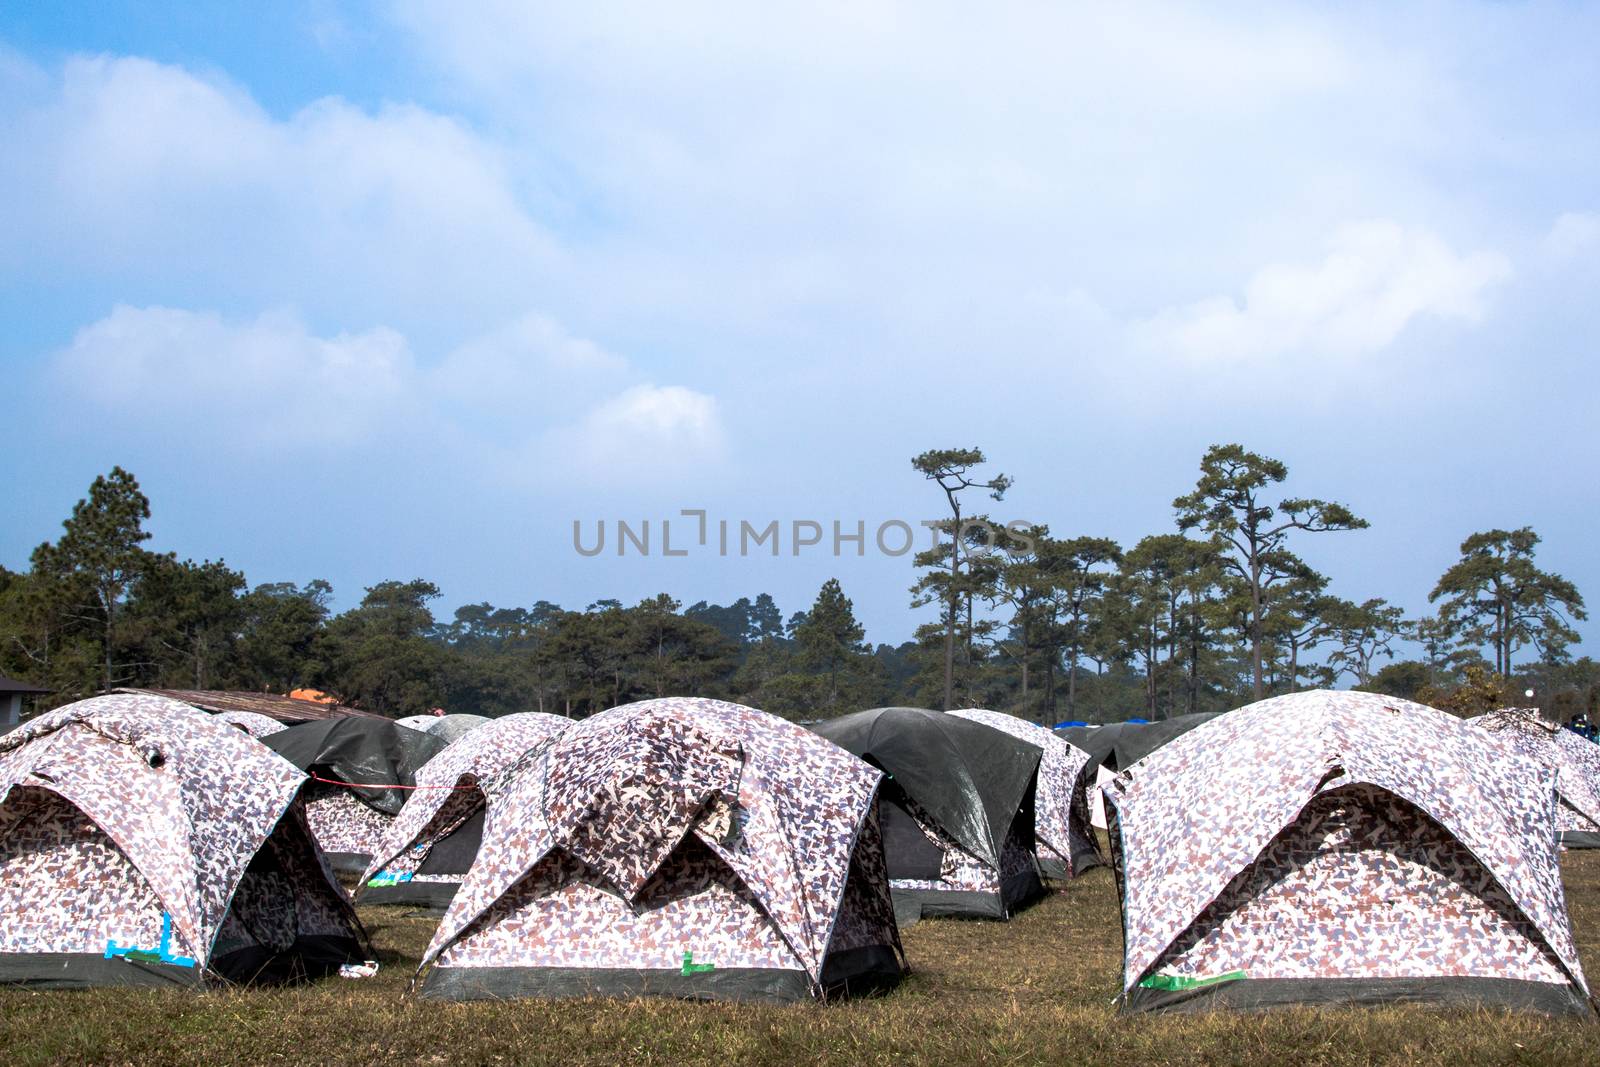 Many tents at a campsite by kannapon